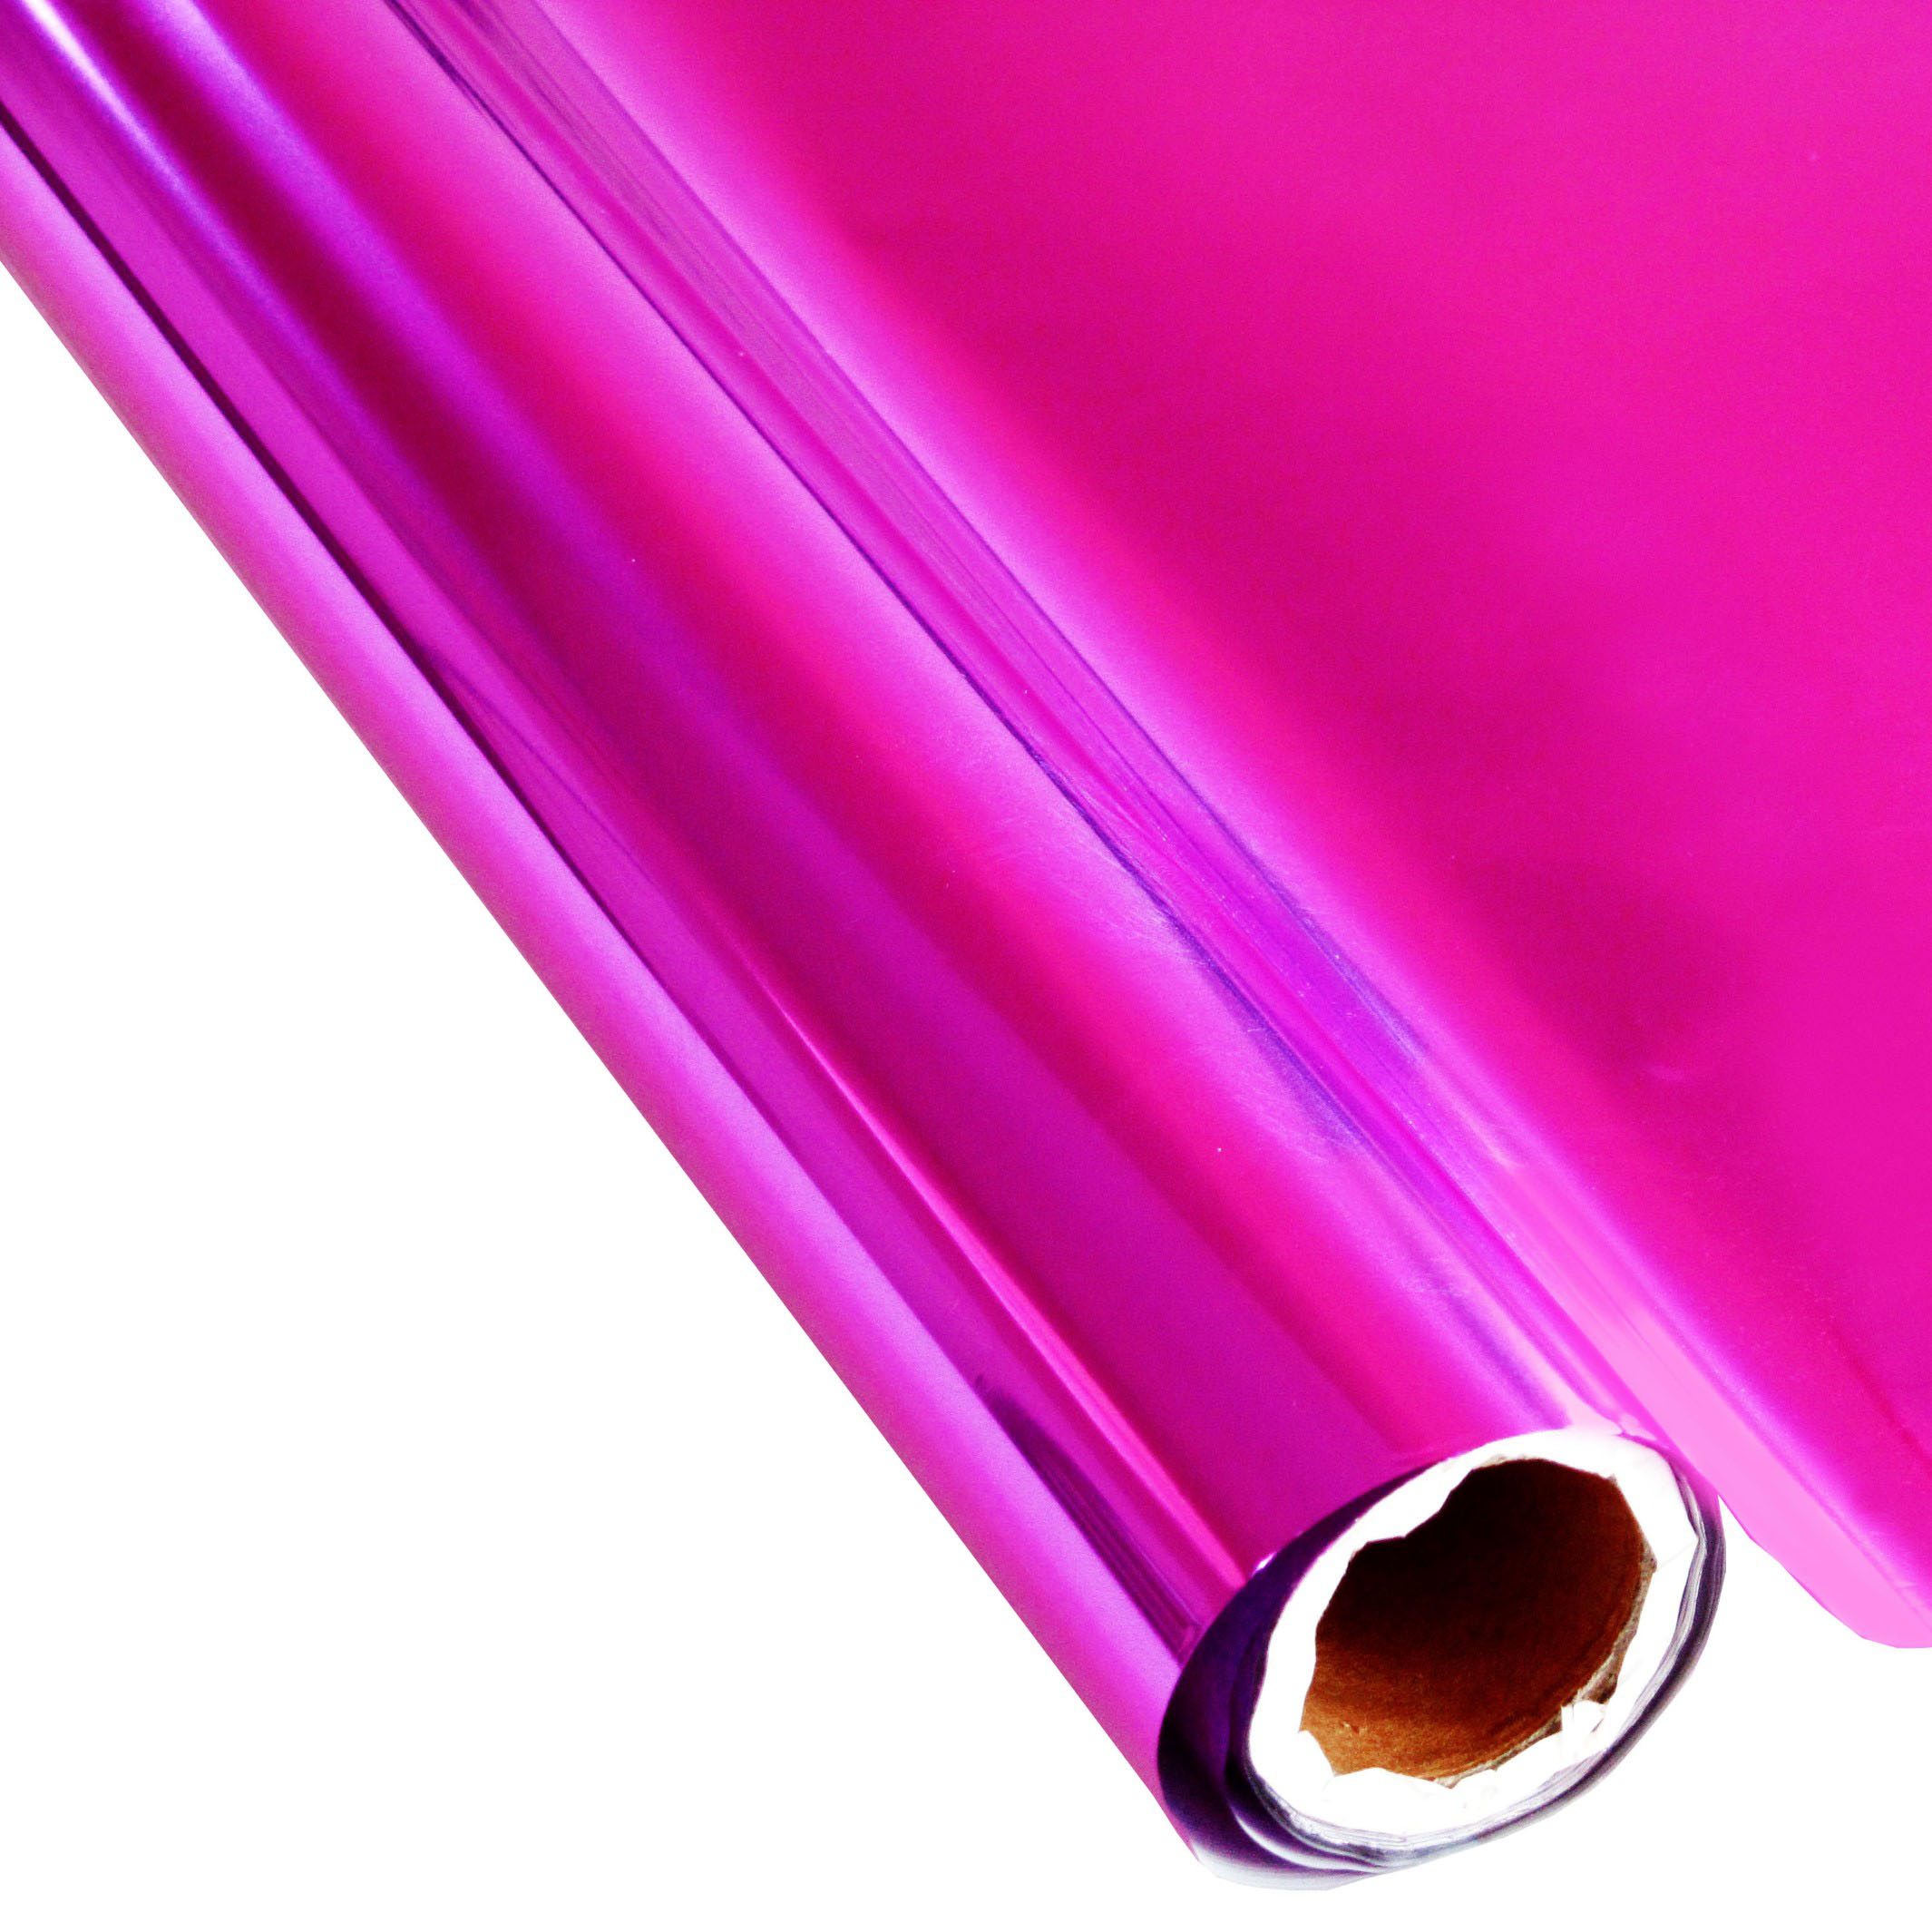 25 Foot Roll of 12" StarCraft Electra Foil - Pink